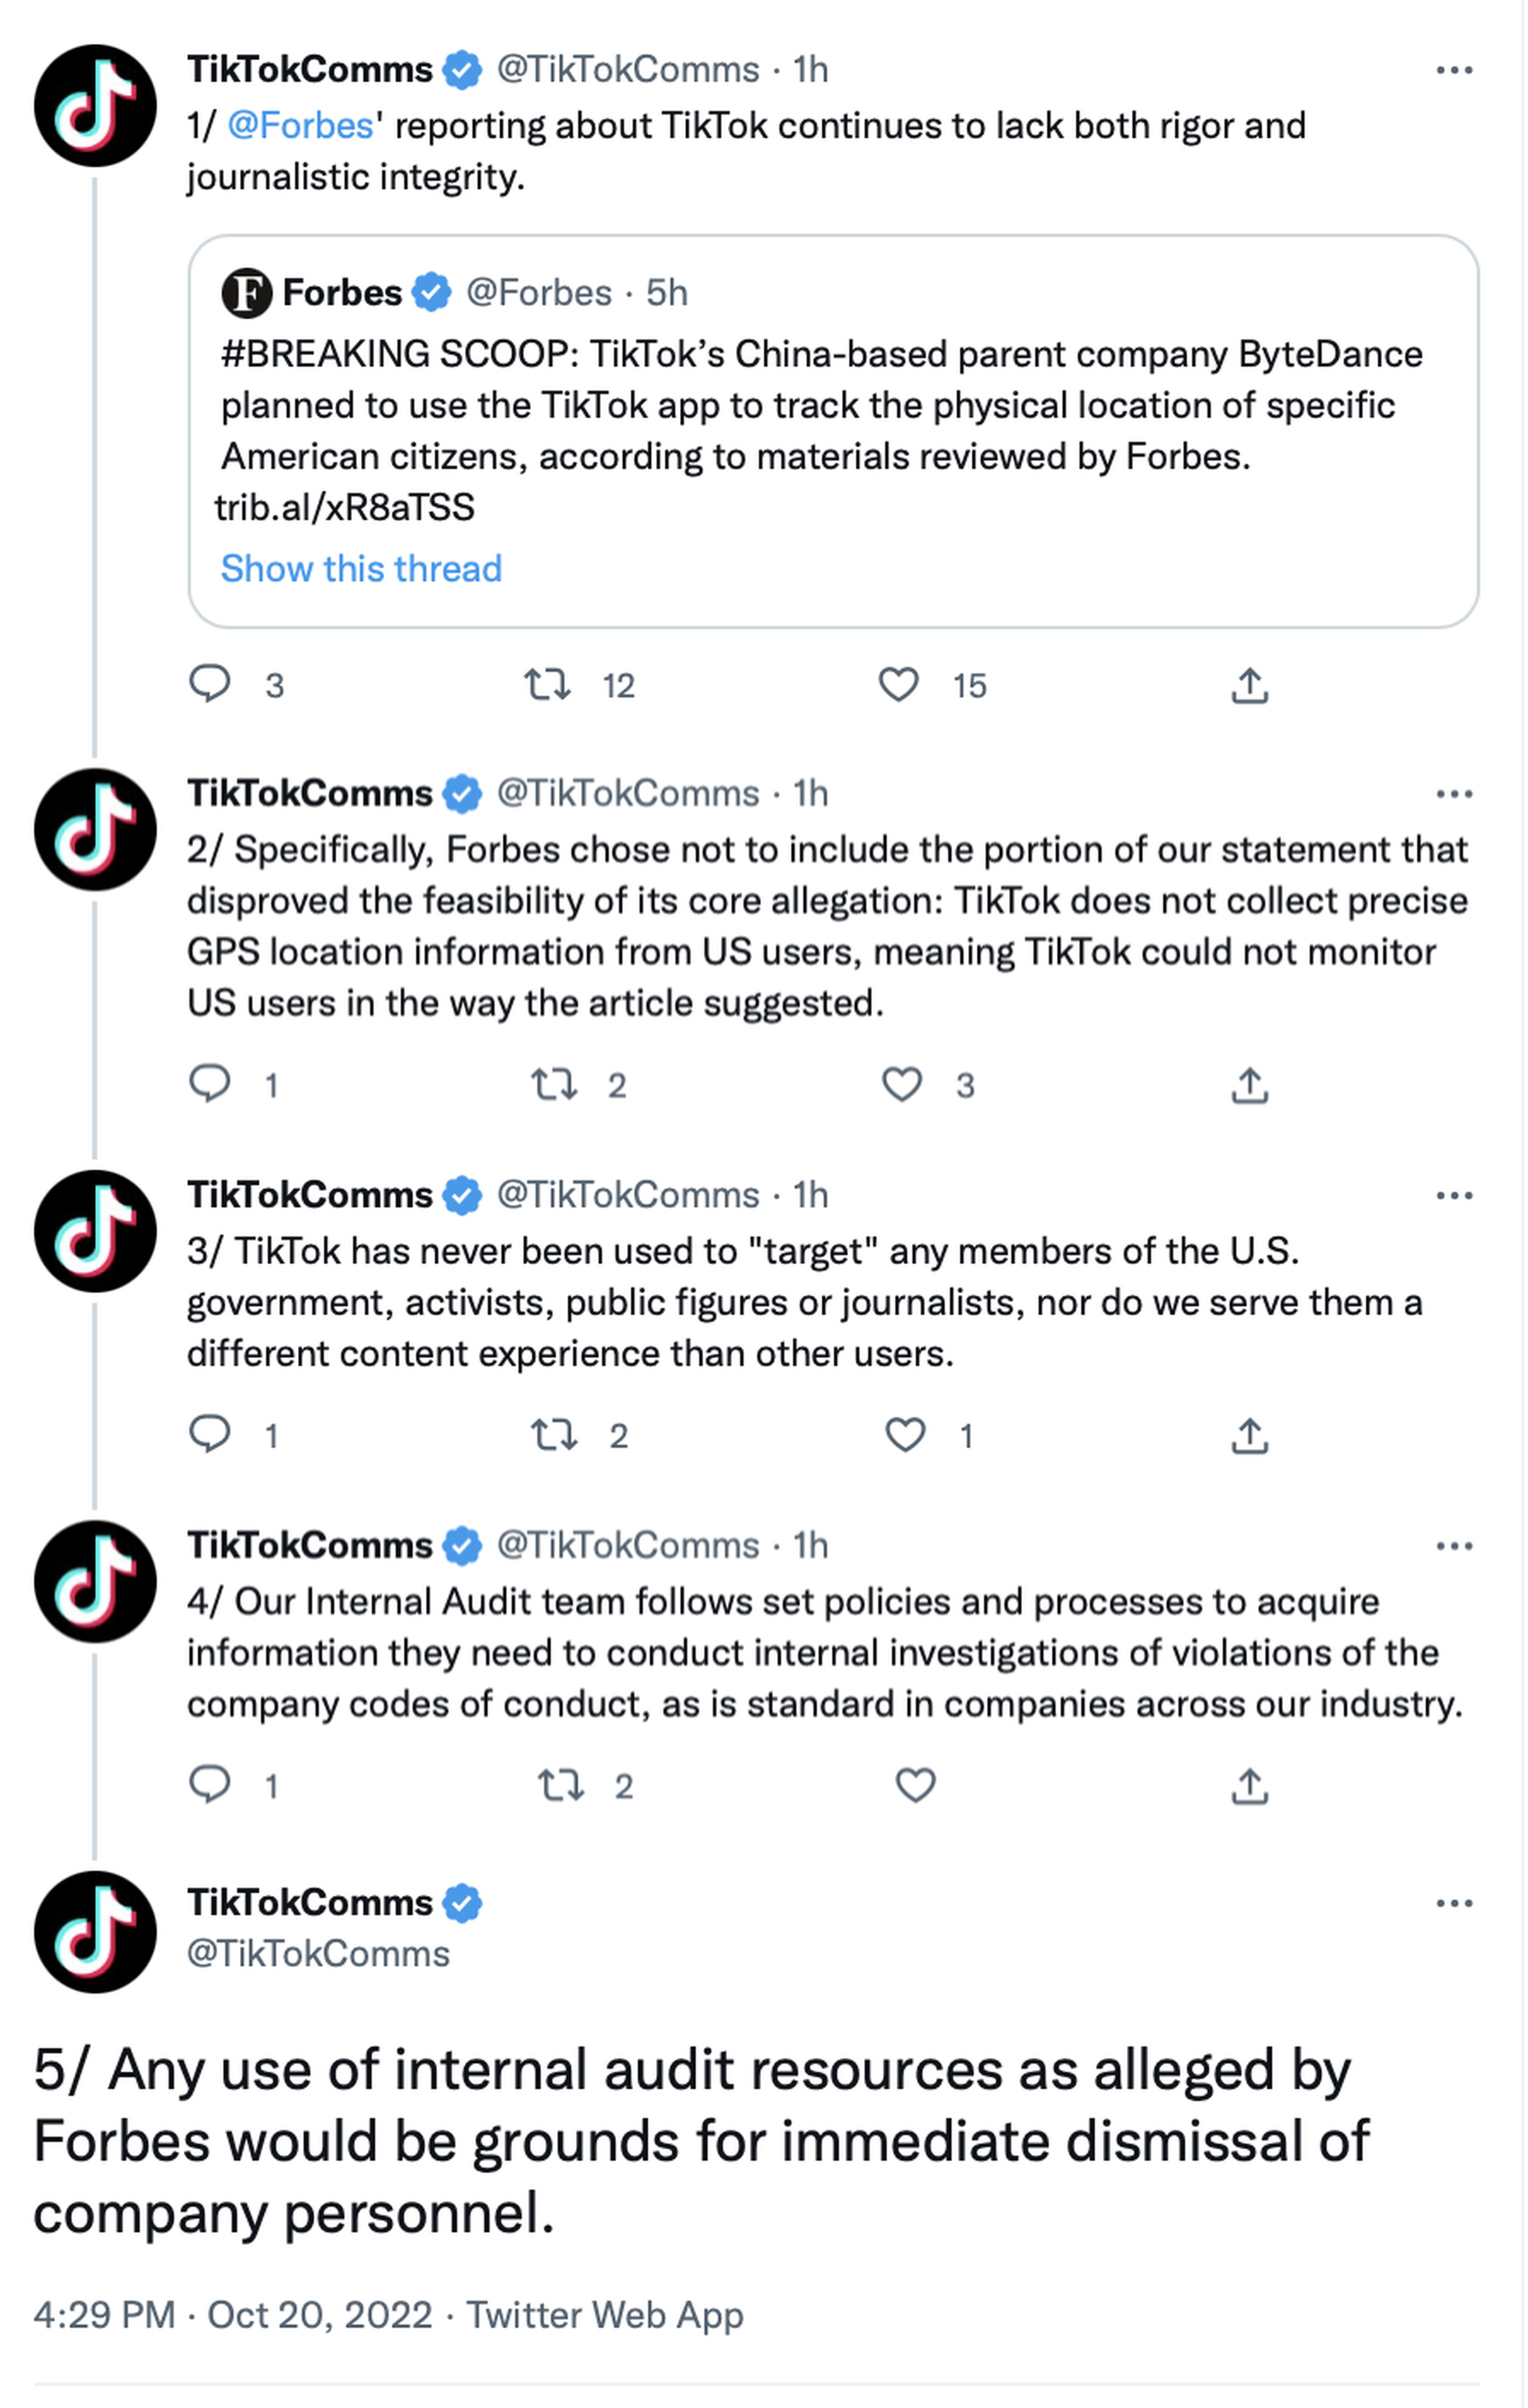 Screenshot of a thread from TikTokComms reading, in part: Forbes’ reporting about TikTok continues to lack both rigor and journalistic integrity. Specifically, Forbes chose not to include the portion of our statement that disproved the feasibility of its core allegation: TikTok does not collect precise GPS location information from US users, meaning TikTok could not monitor US users in the way the article suggested.